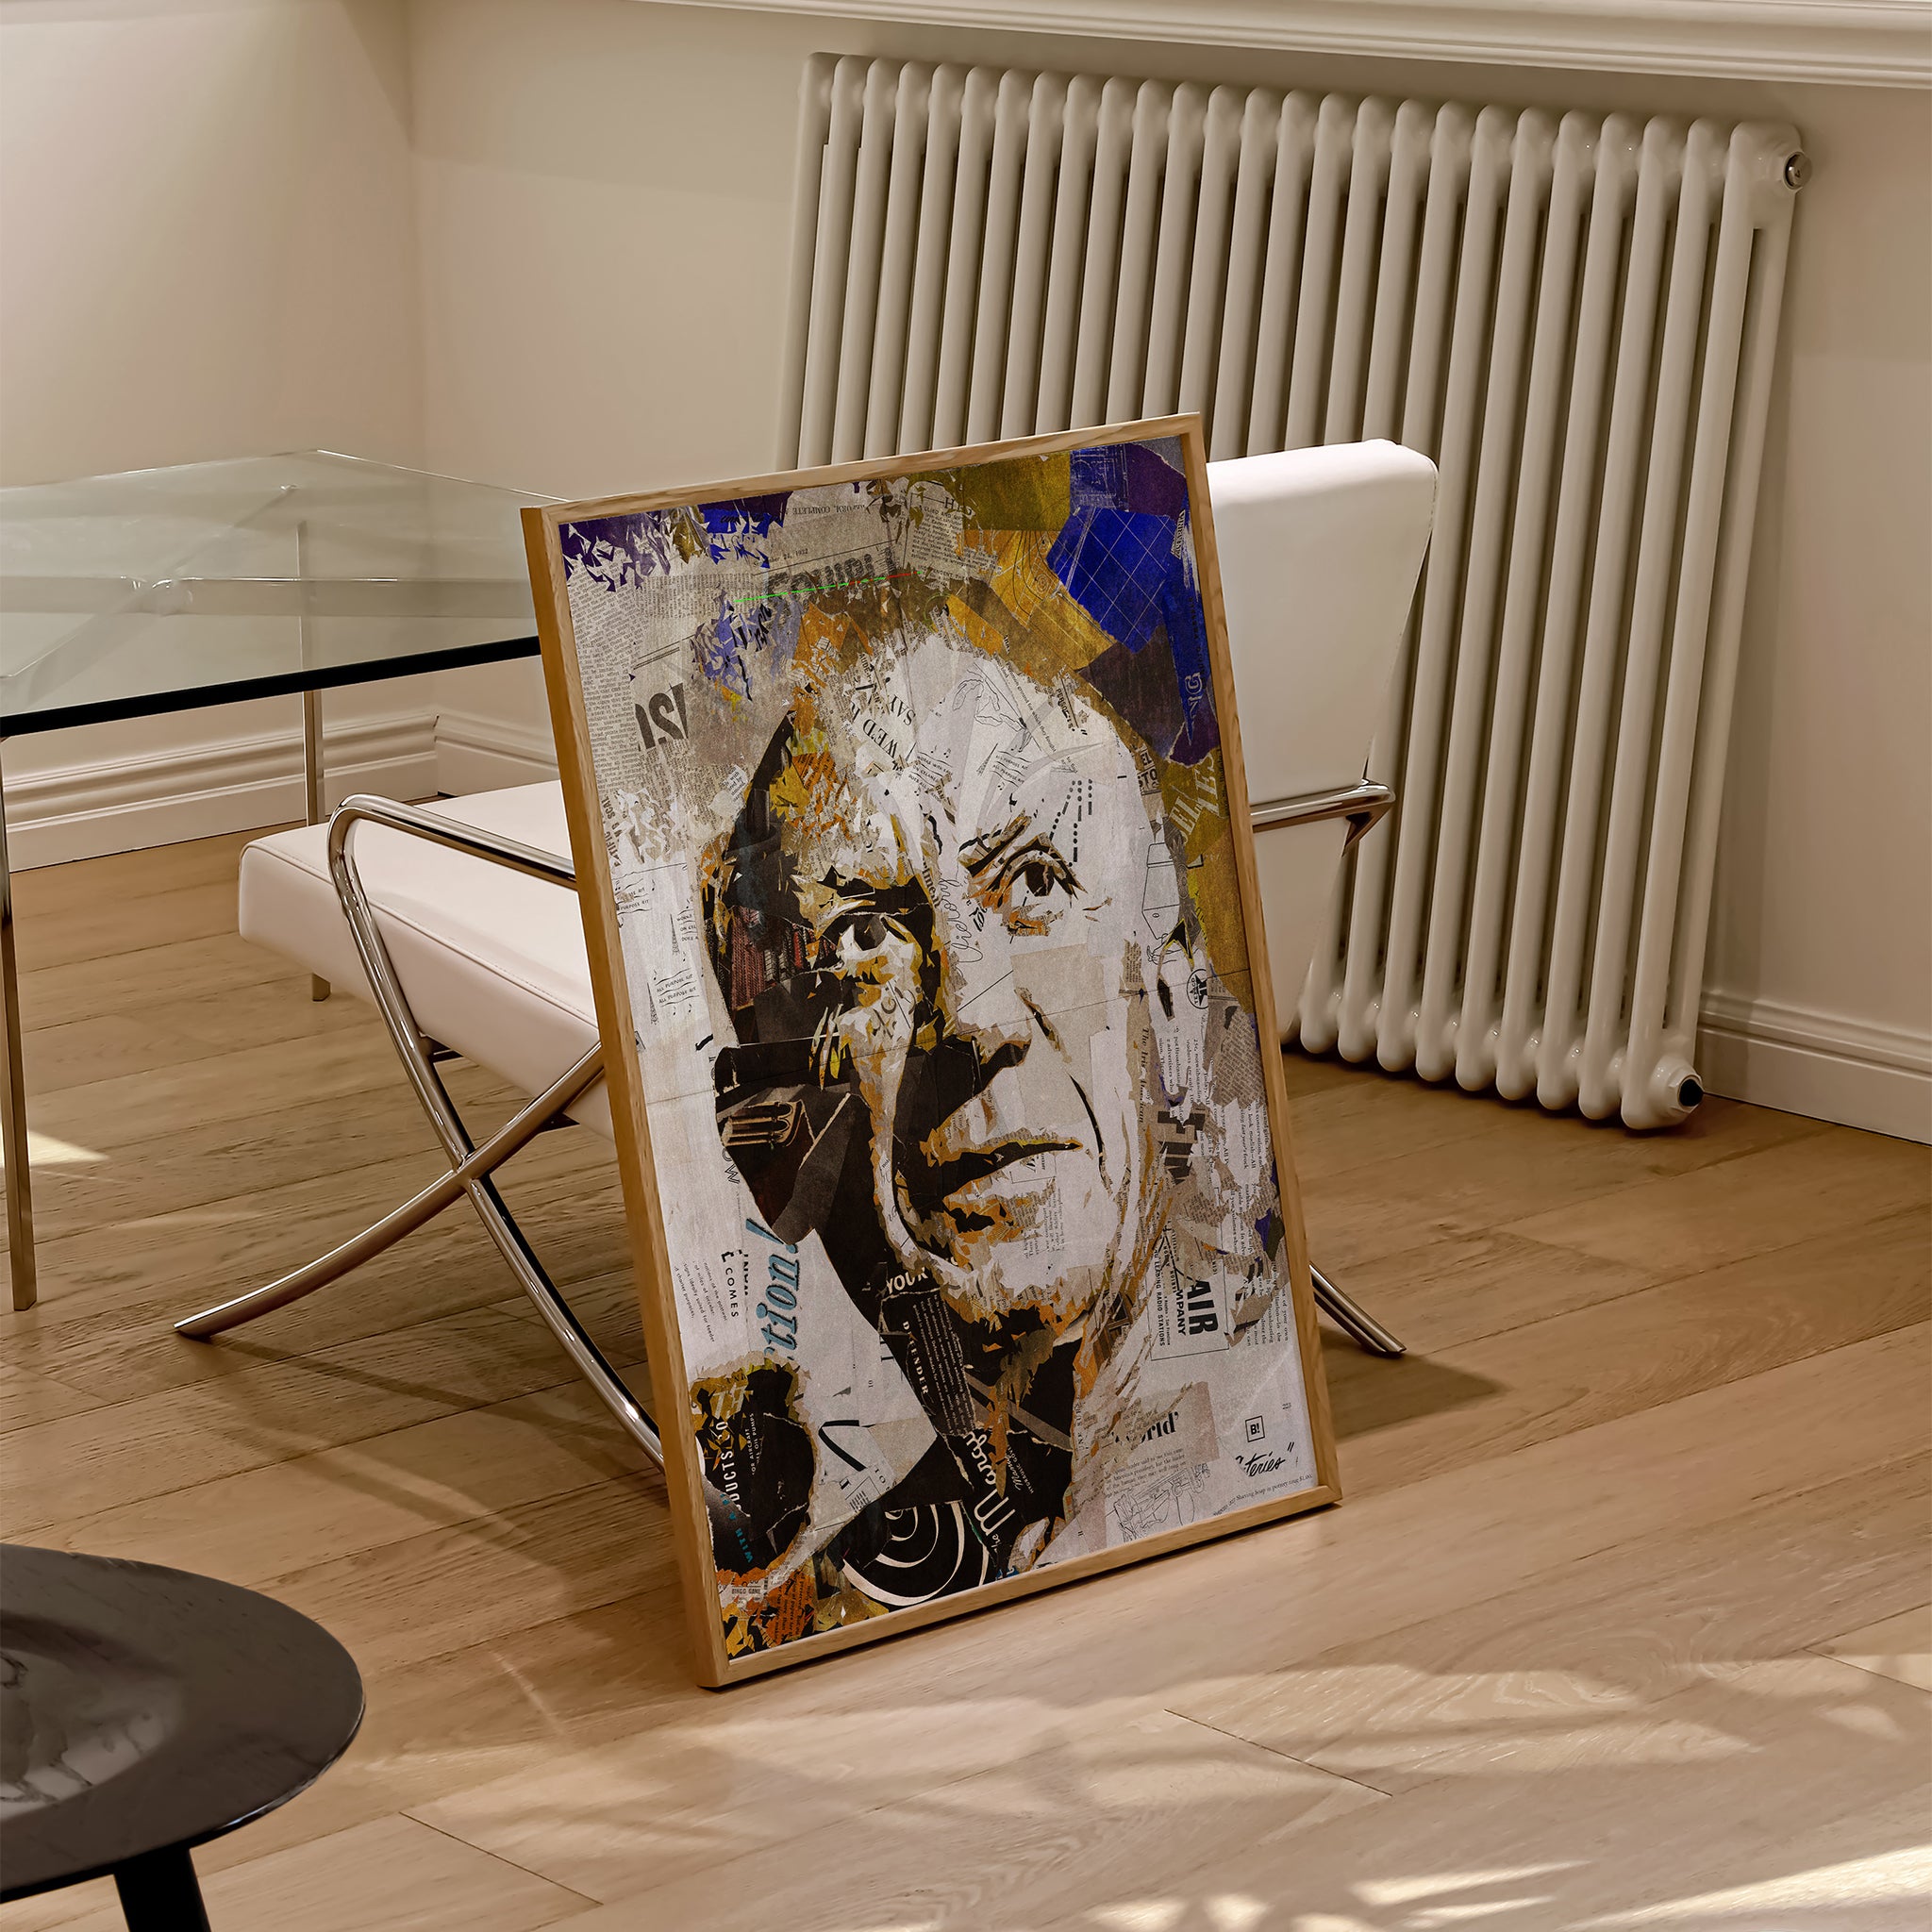 Be inspired by our iconic collage portrait art print of Pablo Picasso. This artwork was printed using the giclée process on archival acid-free paper and is presented in a natural oak frame, capturing its timeless beauty in every detail.